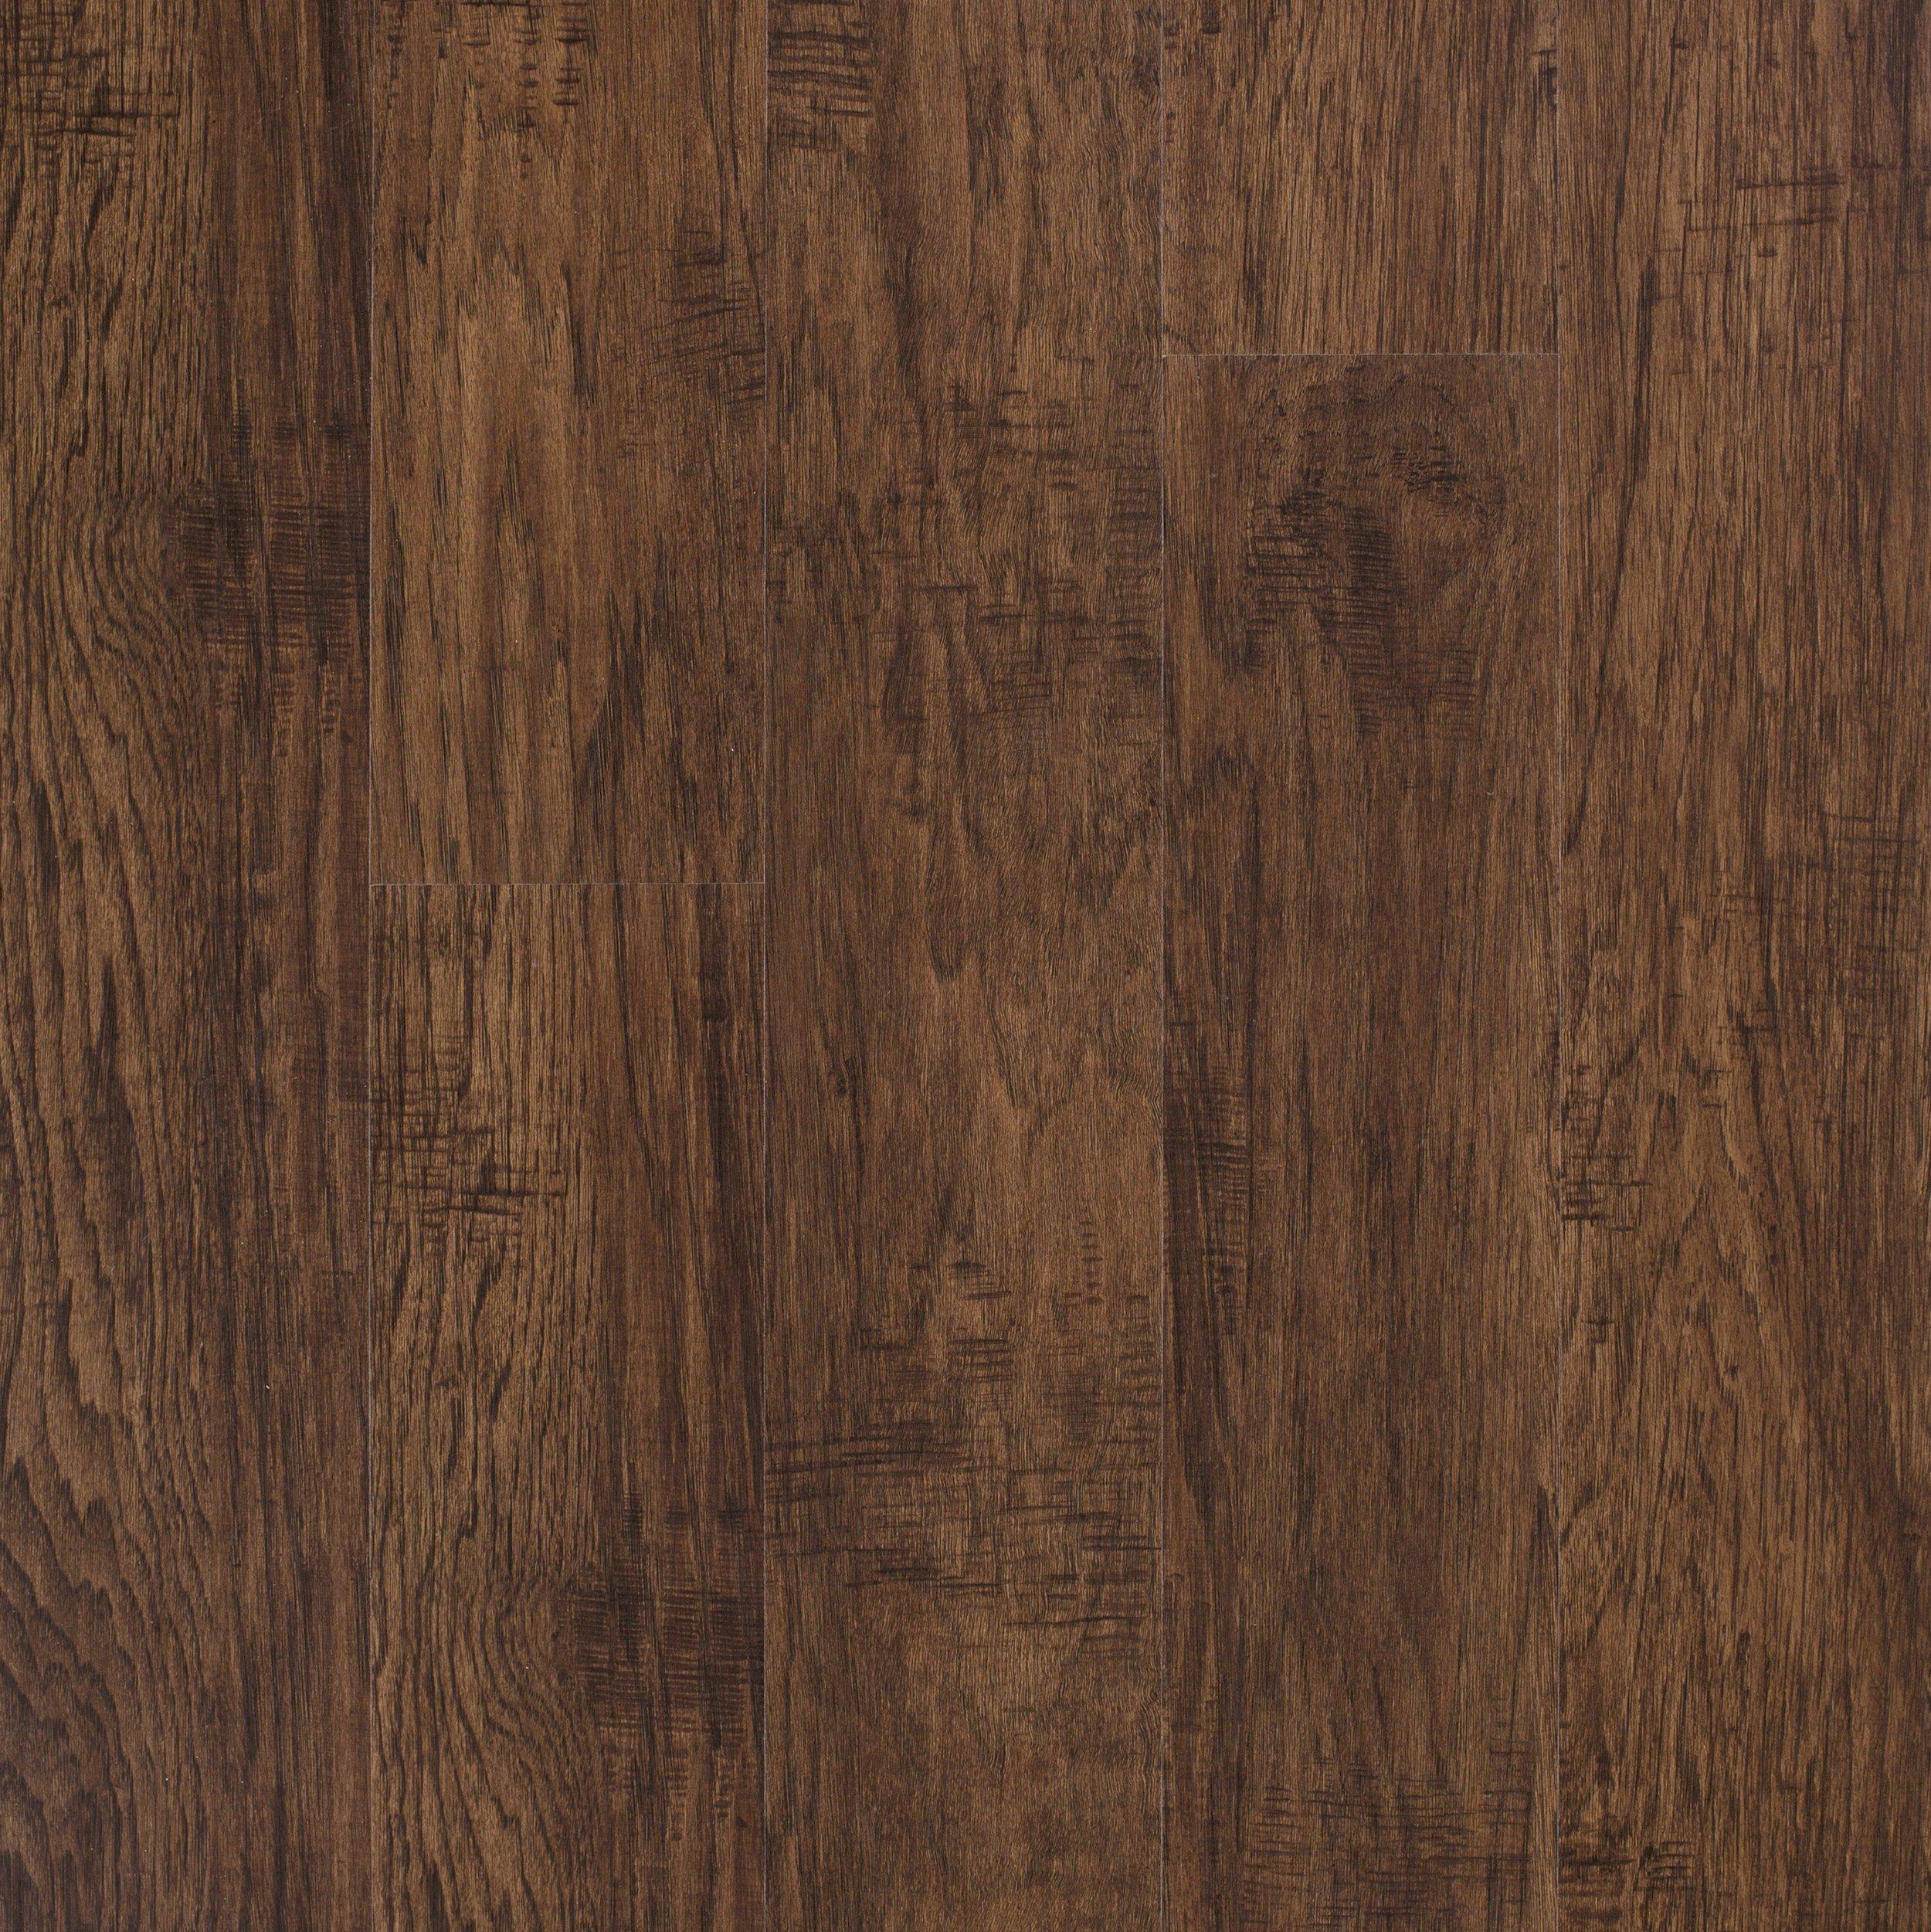 Old Hickory Laminate 12mm 100609551 Floor And Decor